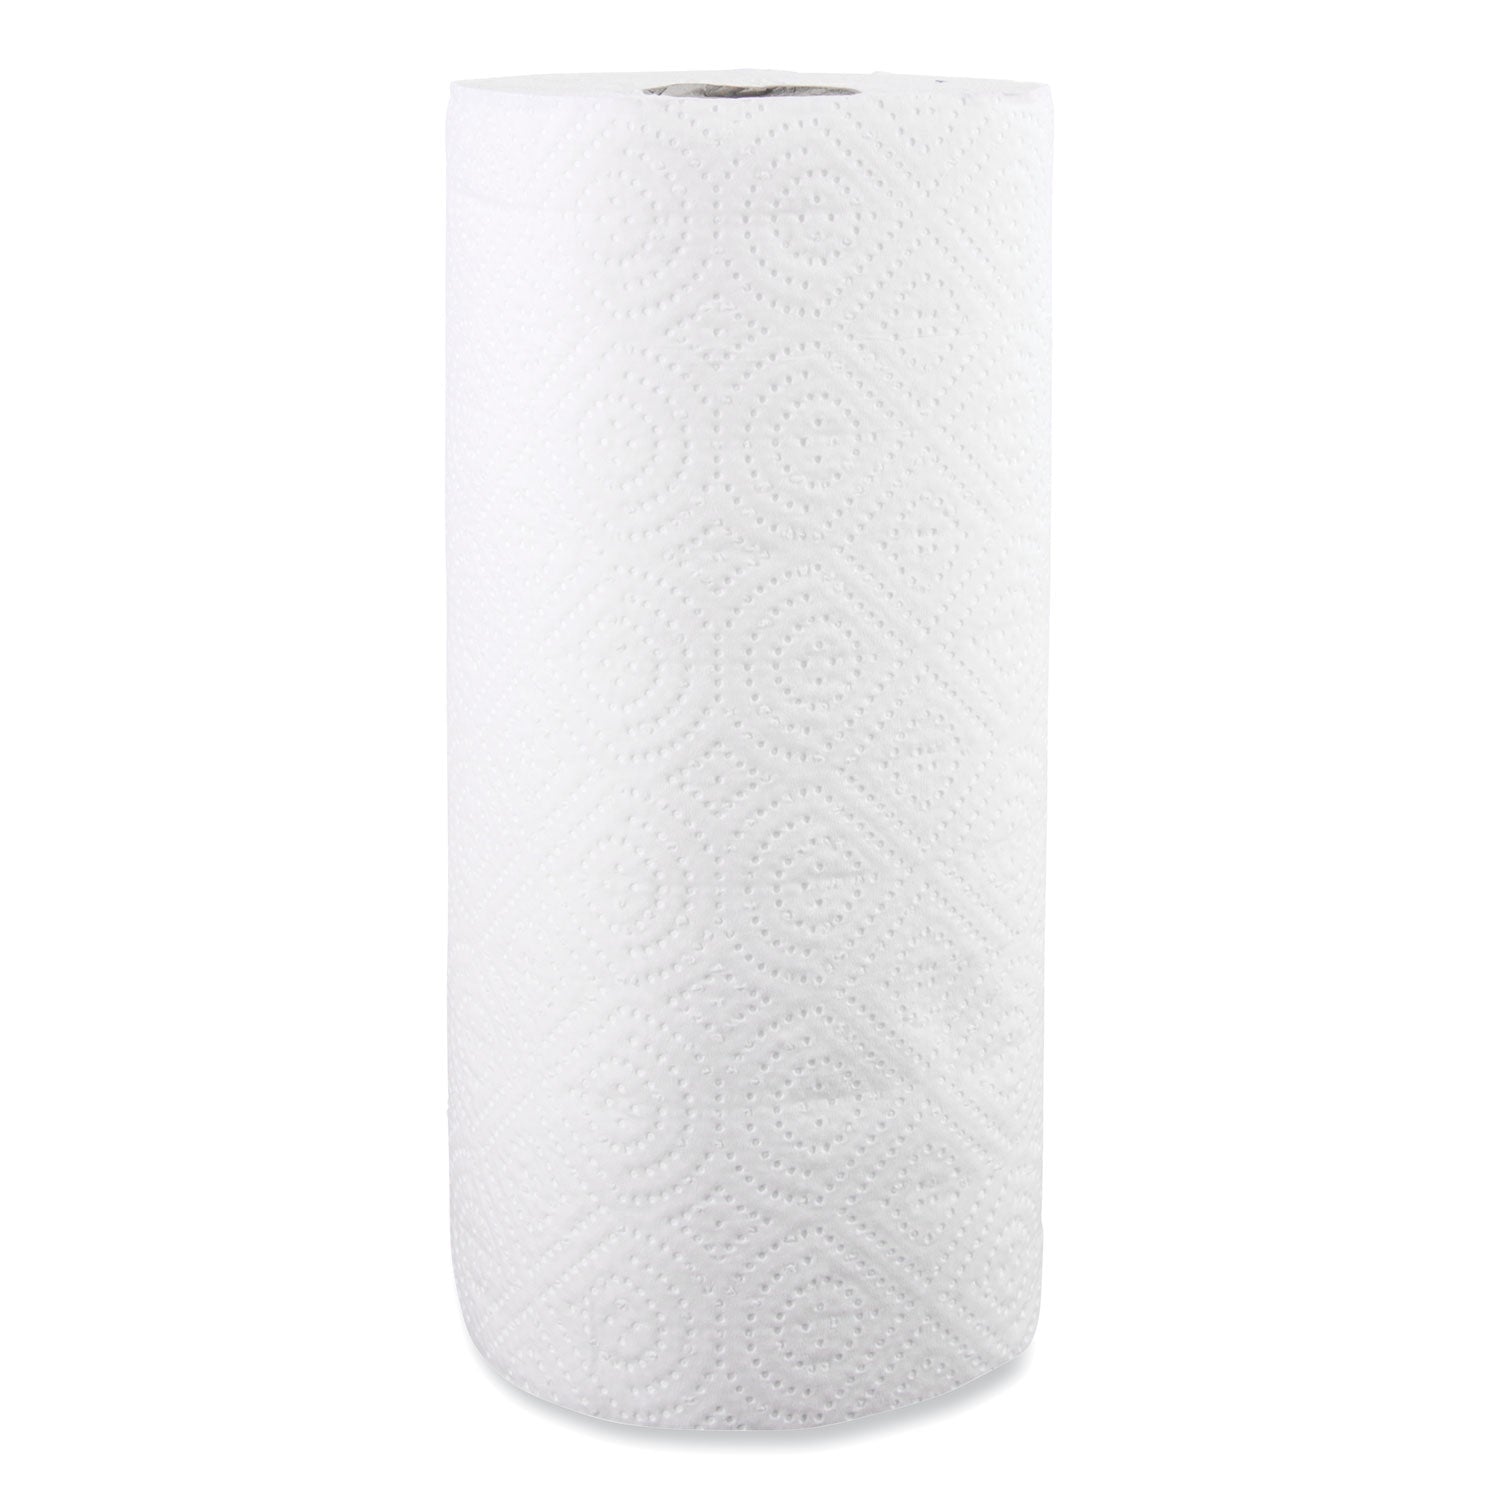 Kitchen Roll Towels, 2-Ply, 11 x 8.5, White, 85/Roll, 30 Rolls/Carton - 2